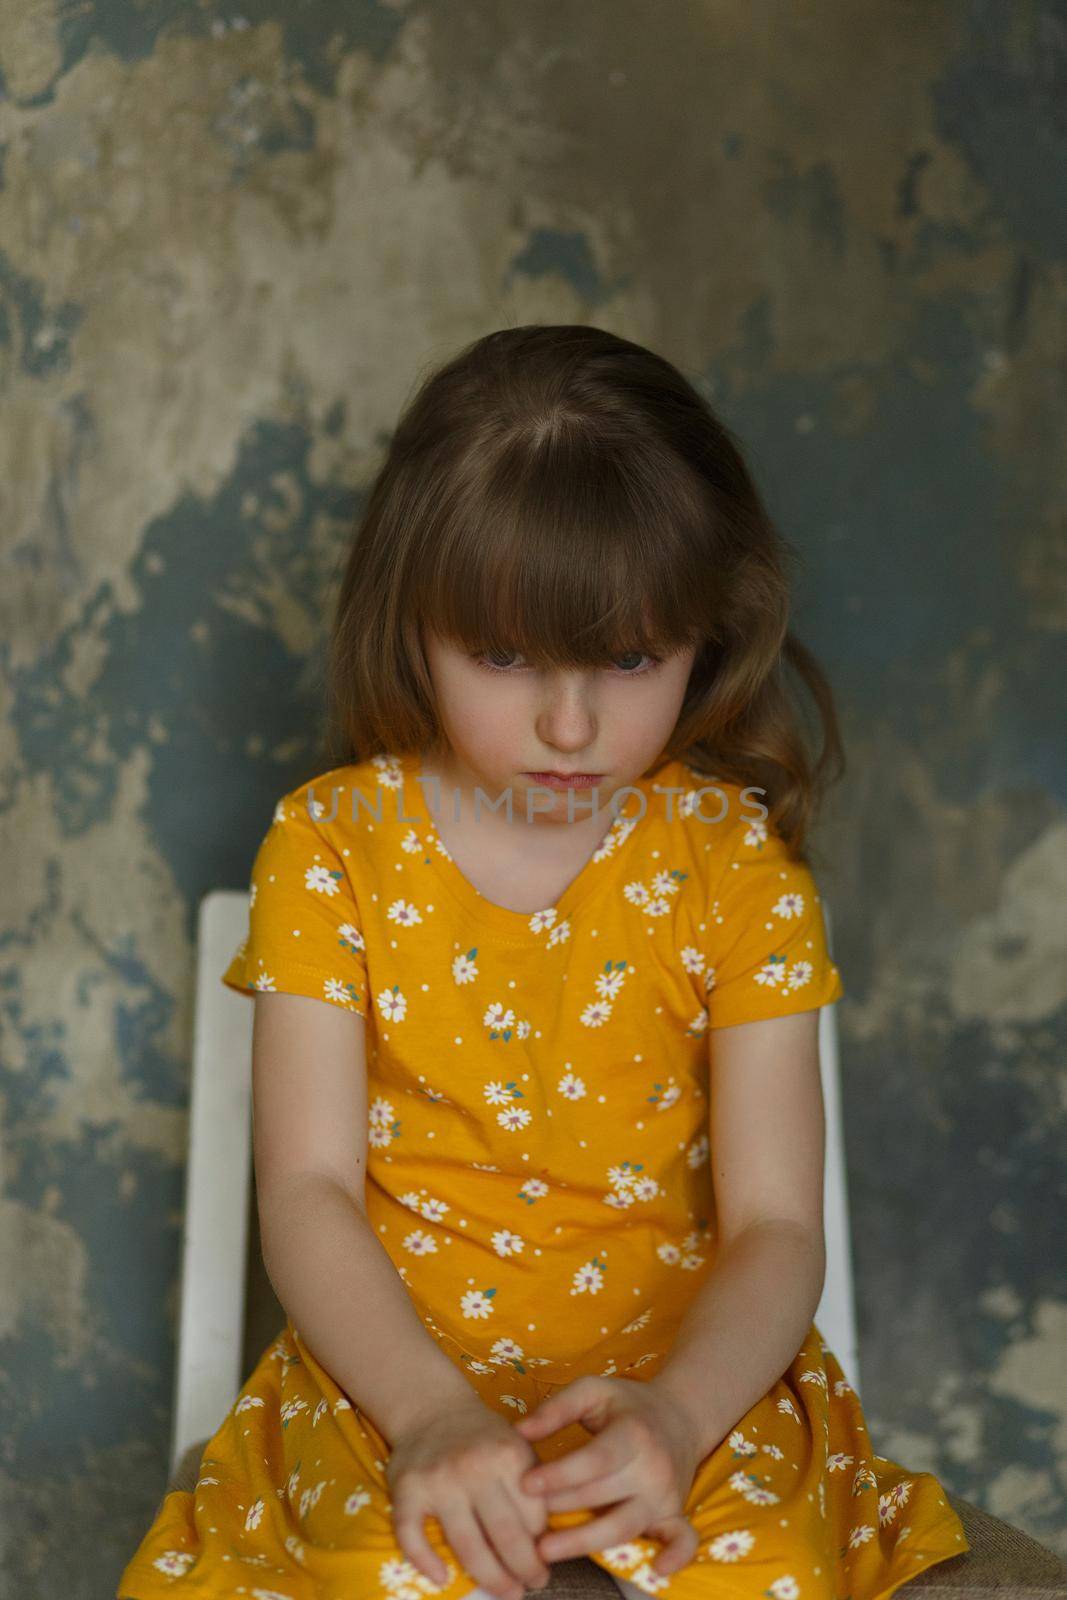 Portrait of a little upset girl in a yellow dress sitting on a chair on an abstract blue background.